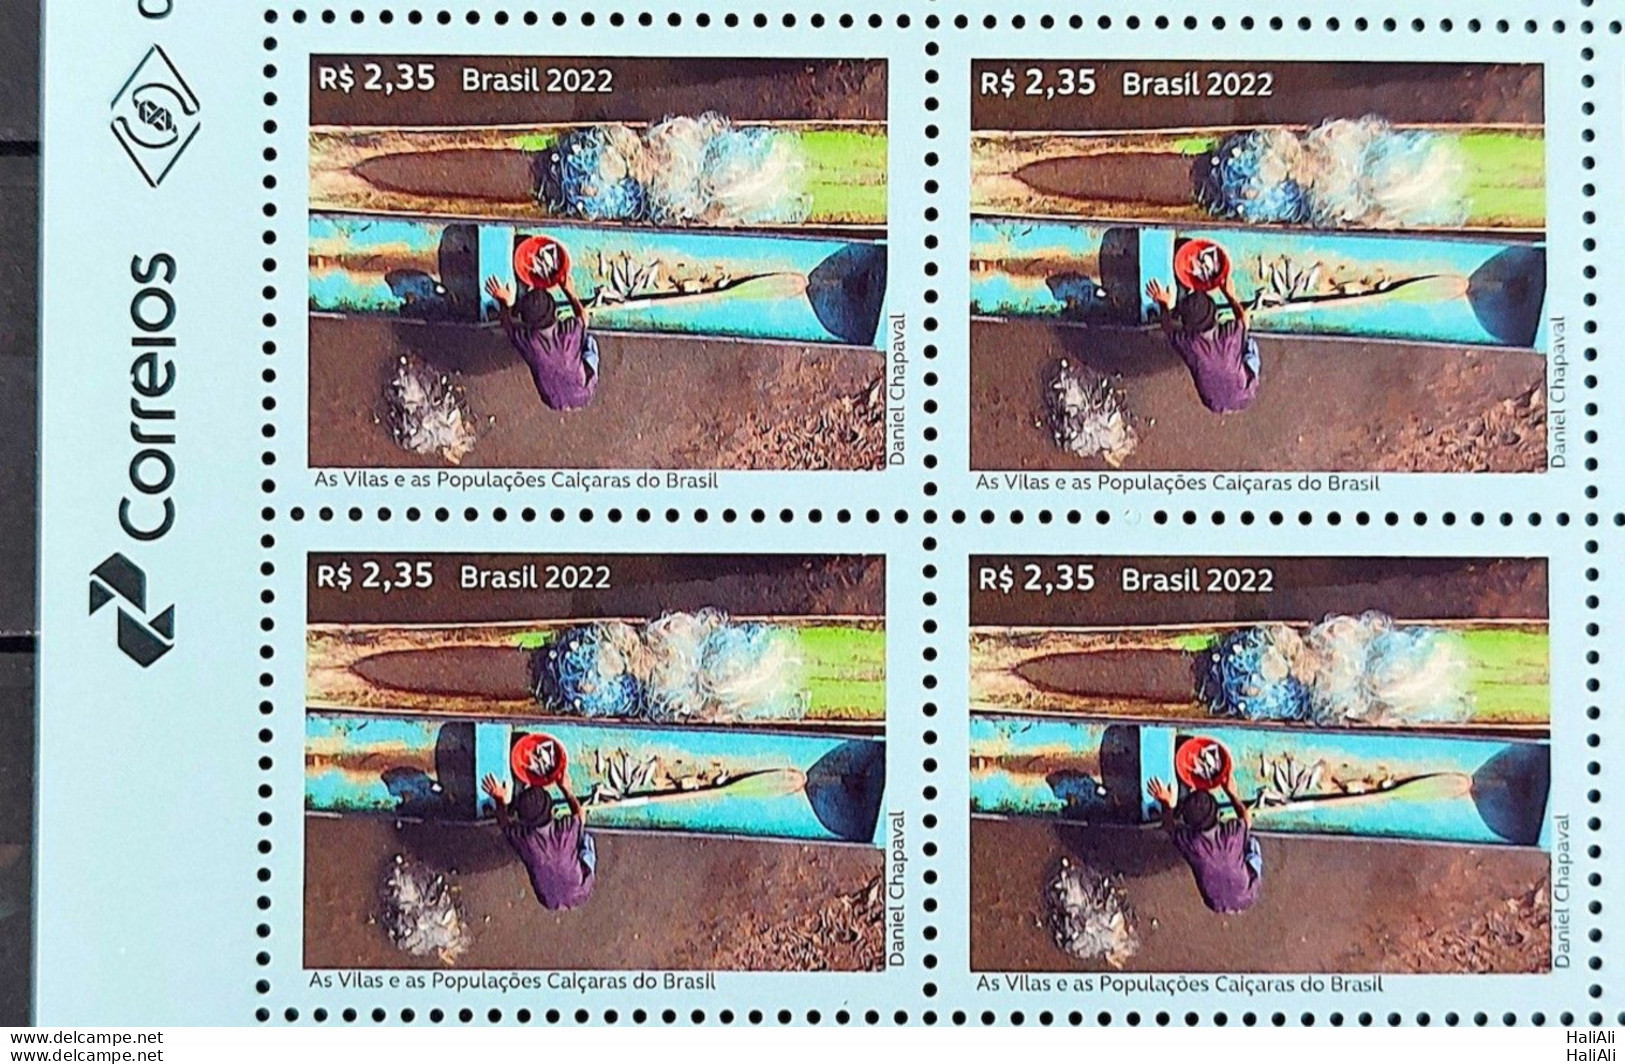 C 4058 Brazil Stamp The Village And Caicaras Populations Ship Fishing 2022 Block Of 4 Vignette Correios - Ungebraucht